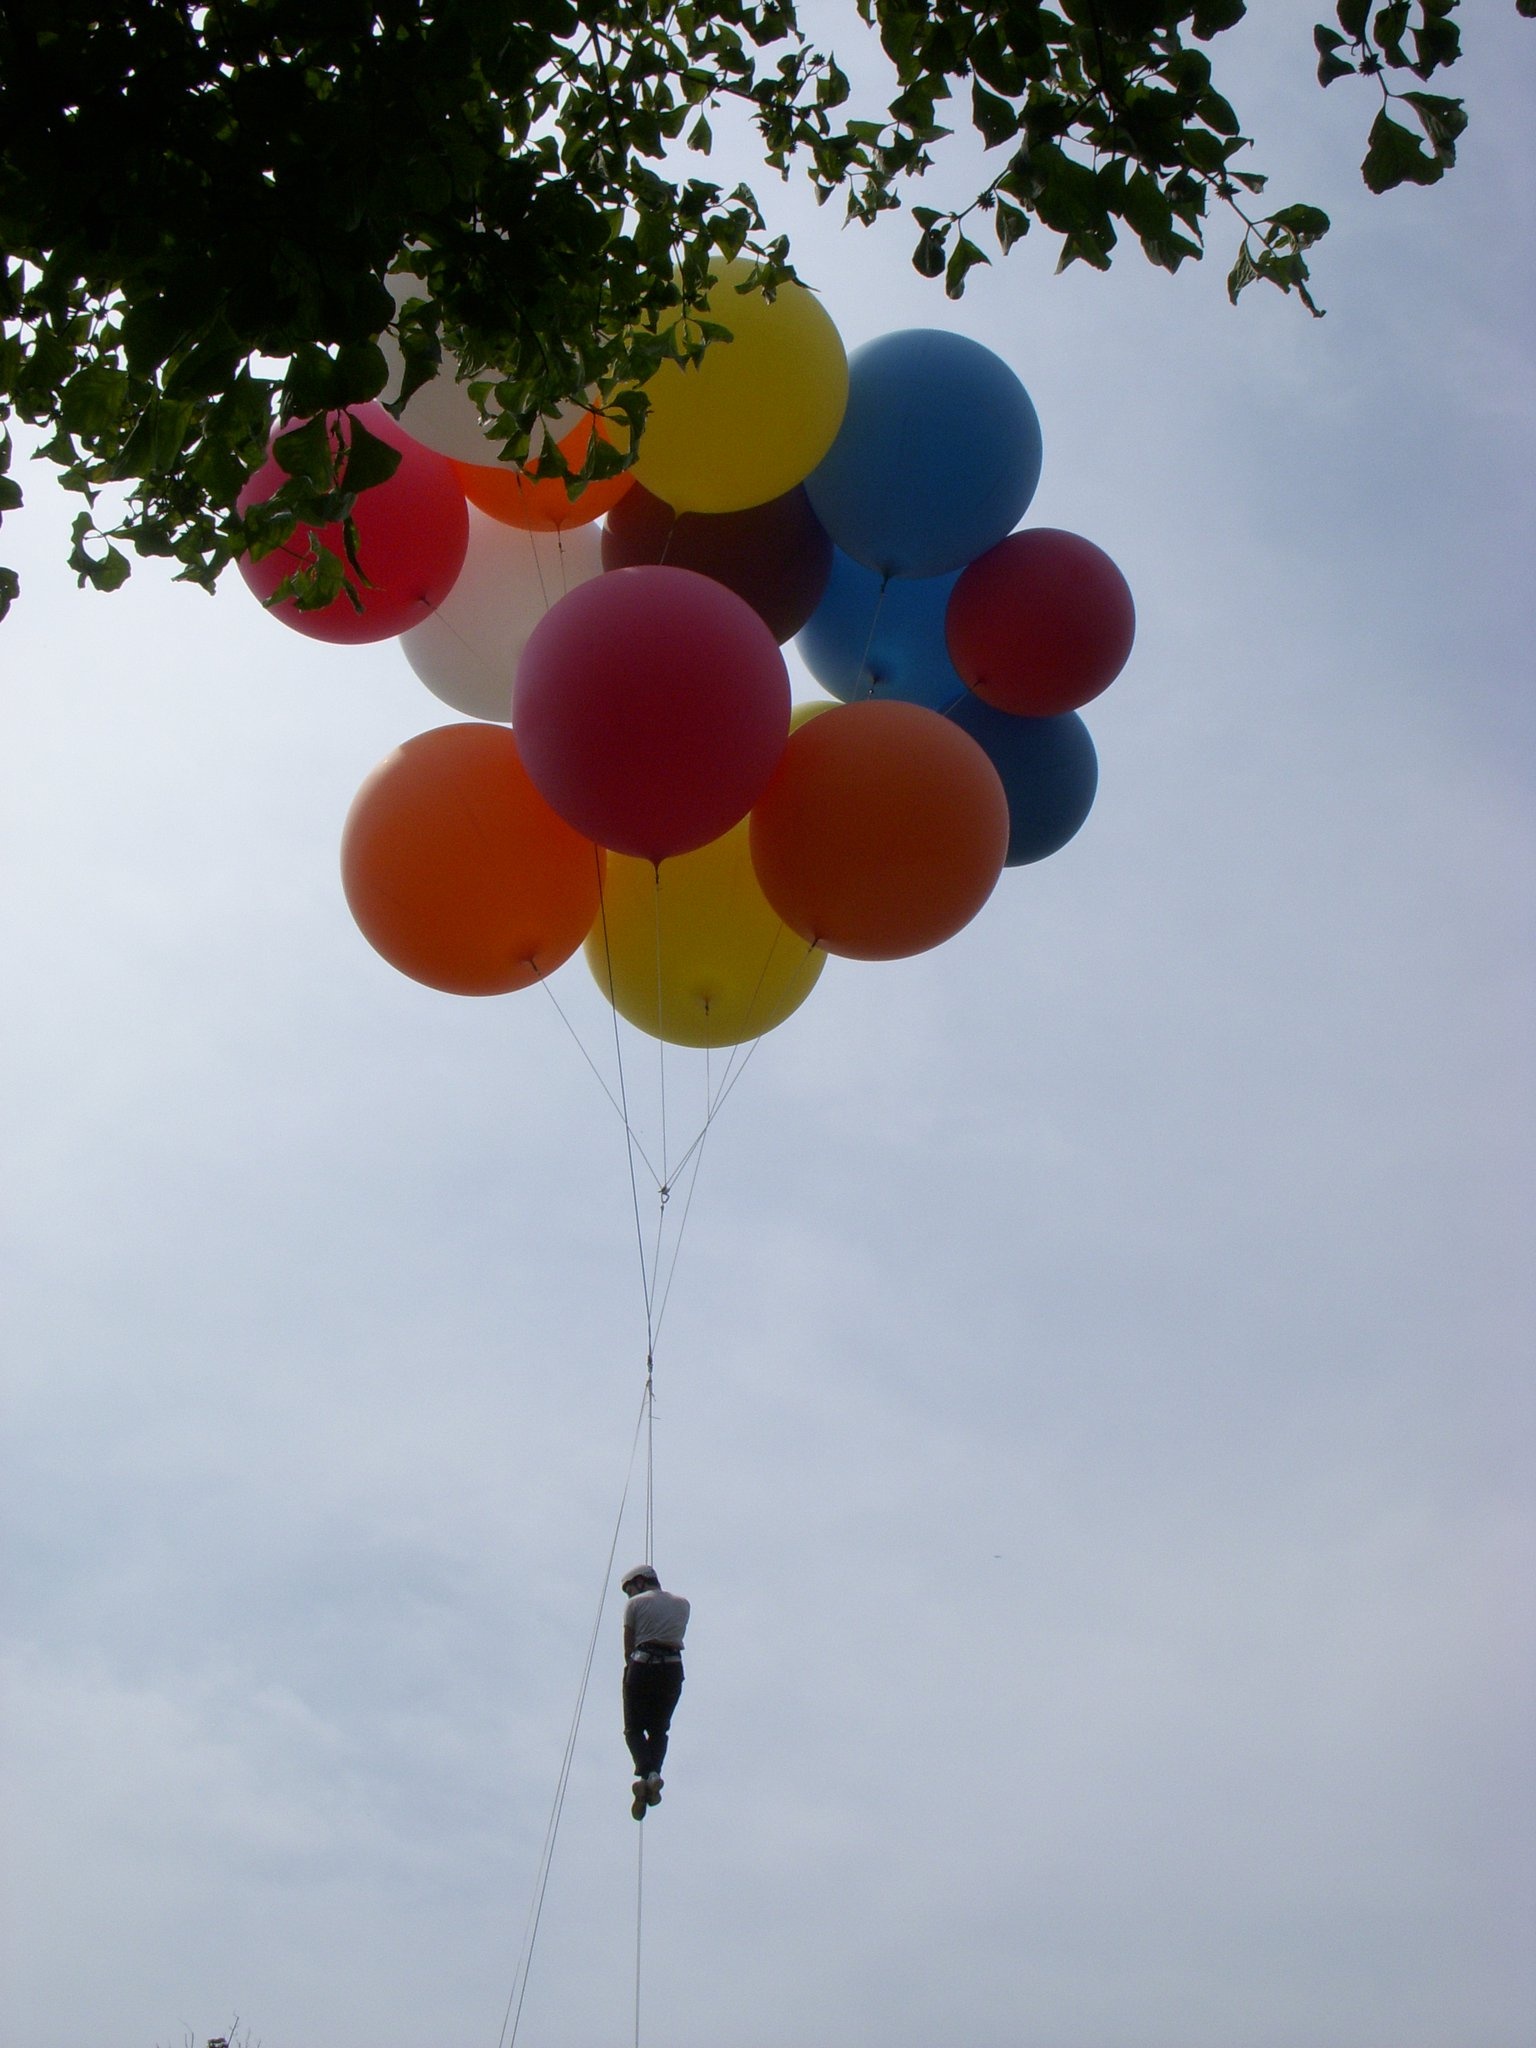 Cluster Ballooning: Emma Steinhardt uses a cluster of helium-inflated rubber balloons to fly. 1540x2050 HD Background.